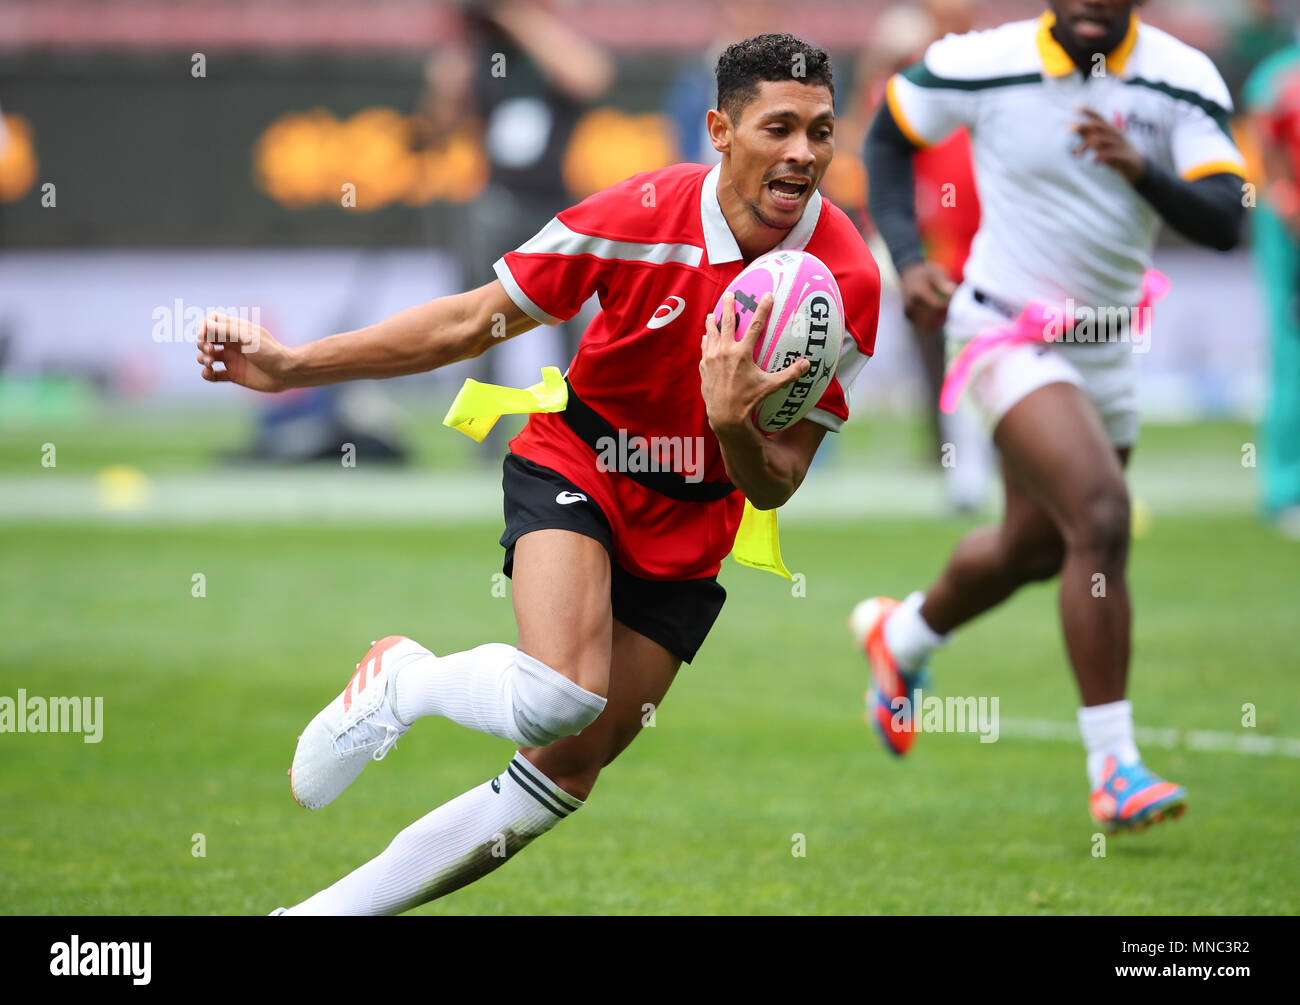 TAG Rugby match where Wayde van Niekerk, the IAAF world record holder and world champion, injured his knee at DHL Newlands on Saturday 7 October 2017 Stock Photo